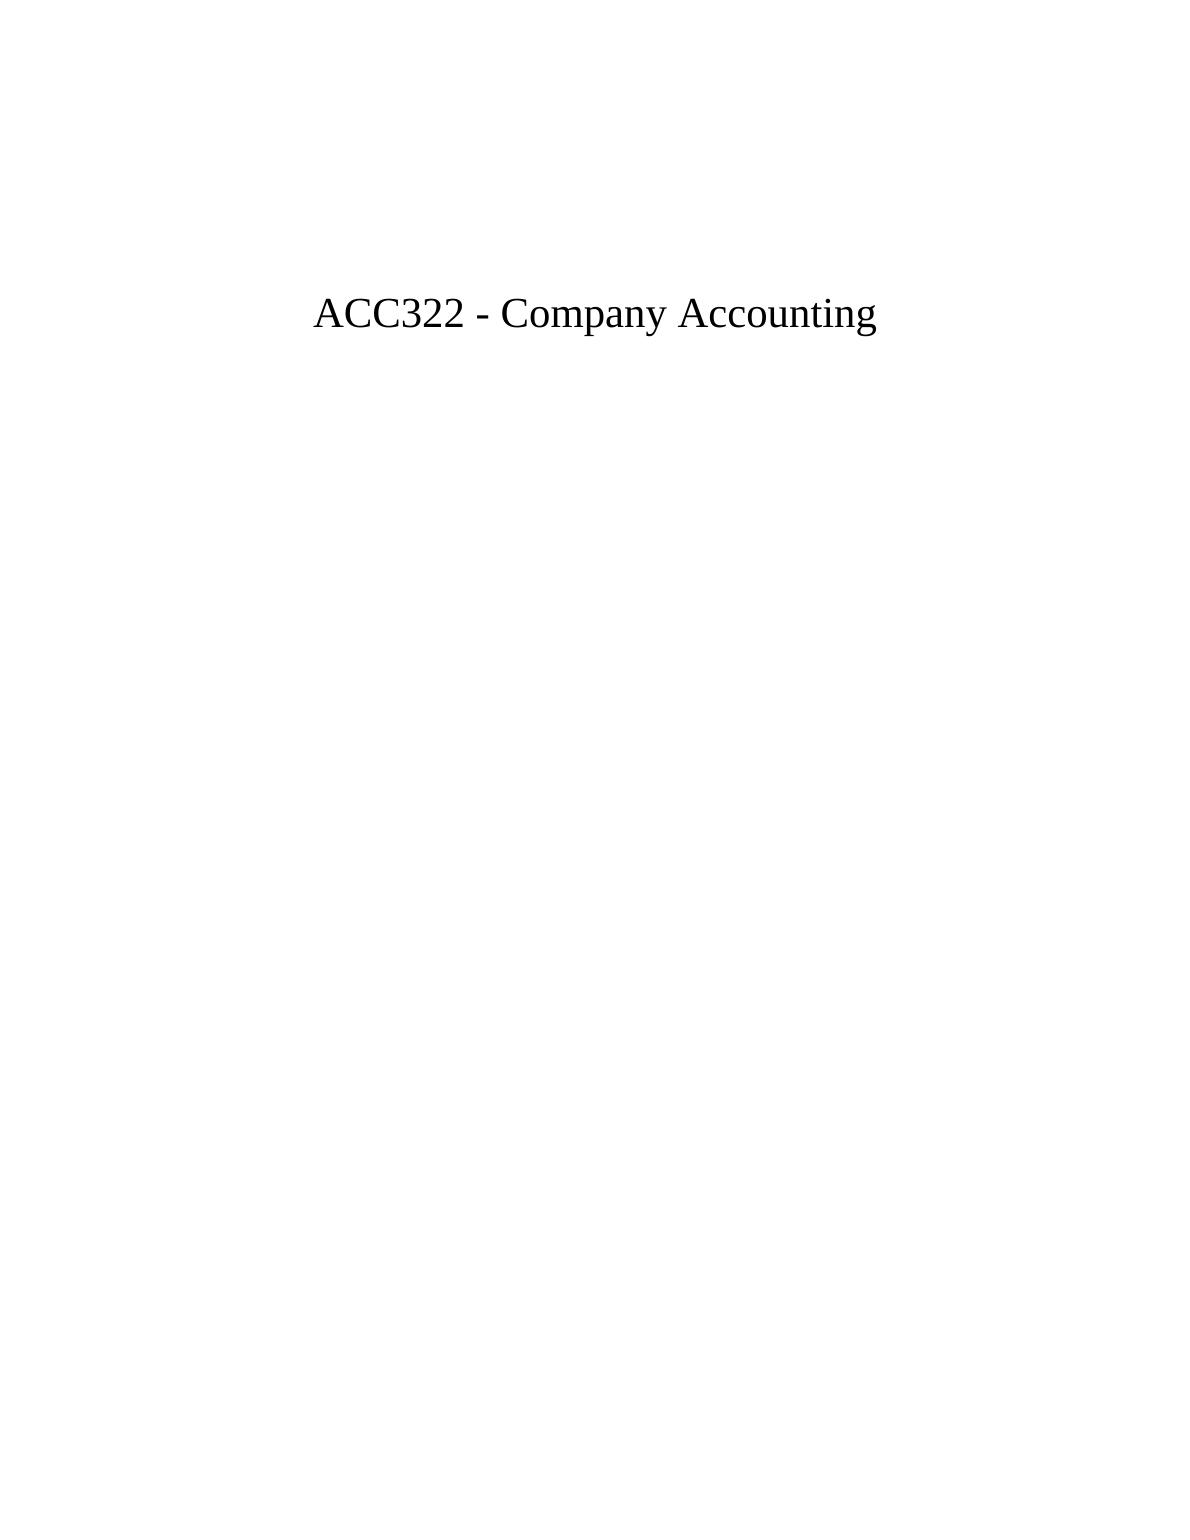 Company Accounting: Tax Calculation, Deferred Tax Worksheet, Journal Entries_1